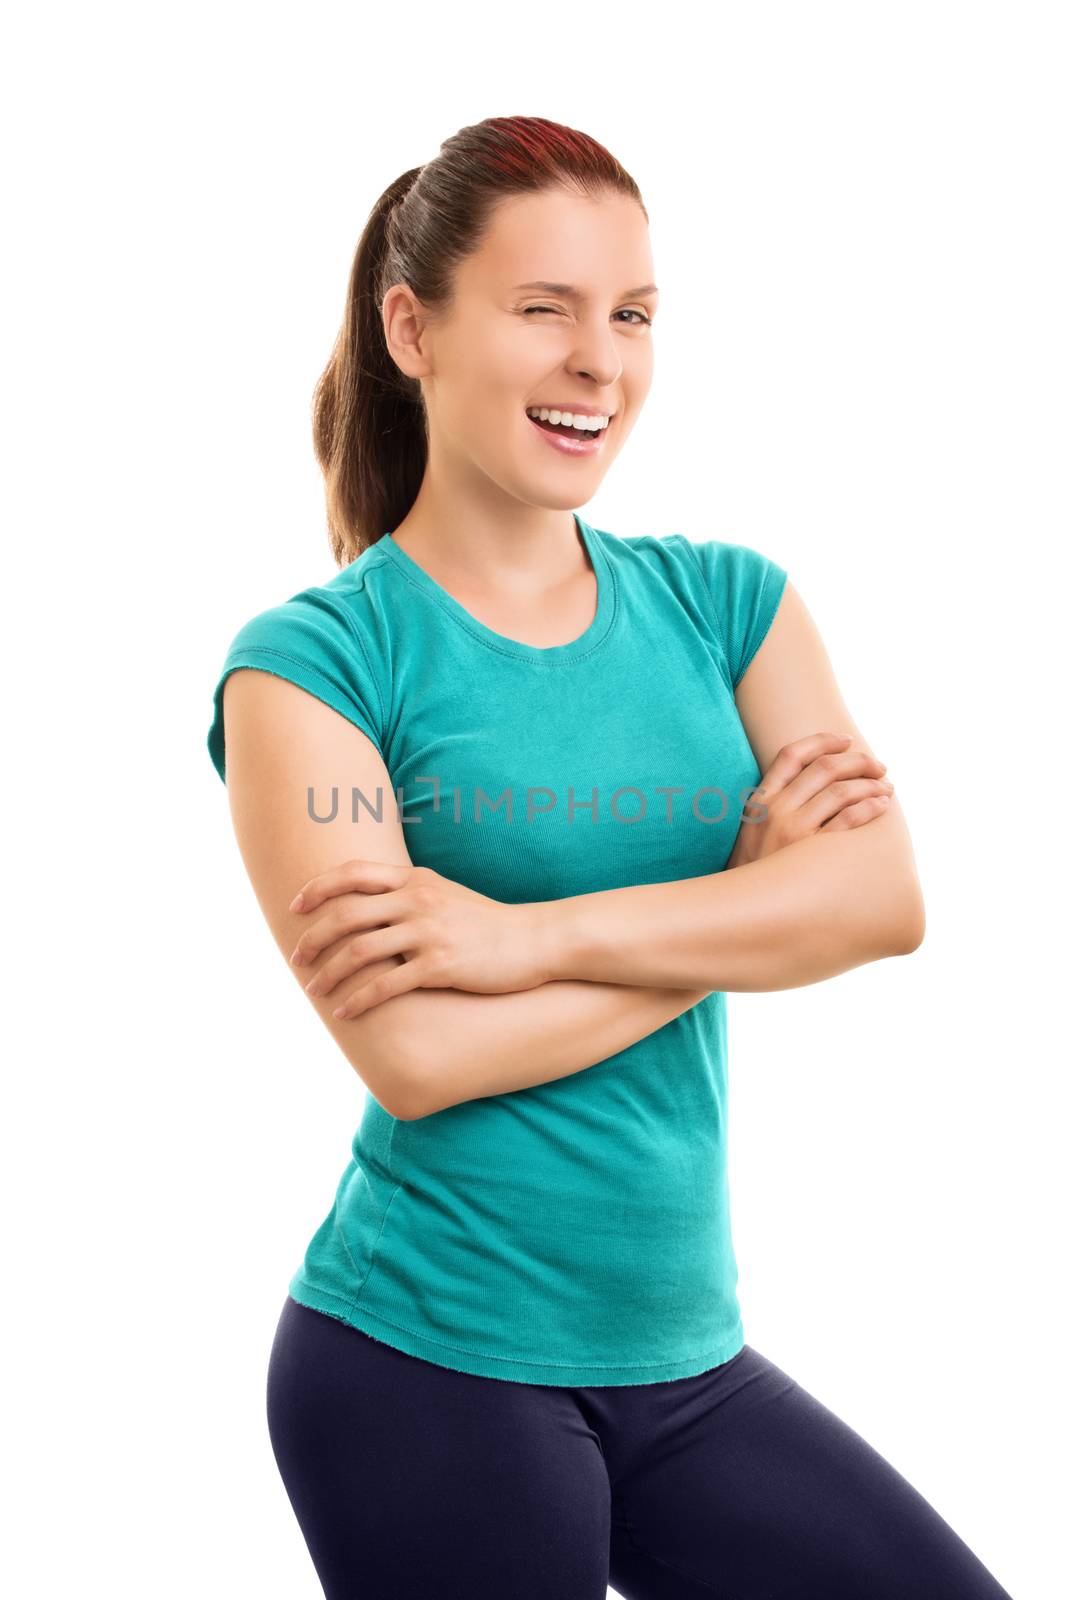 Smiling young athlete winking by Mendelex